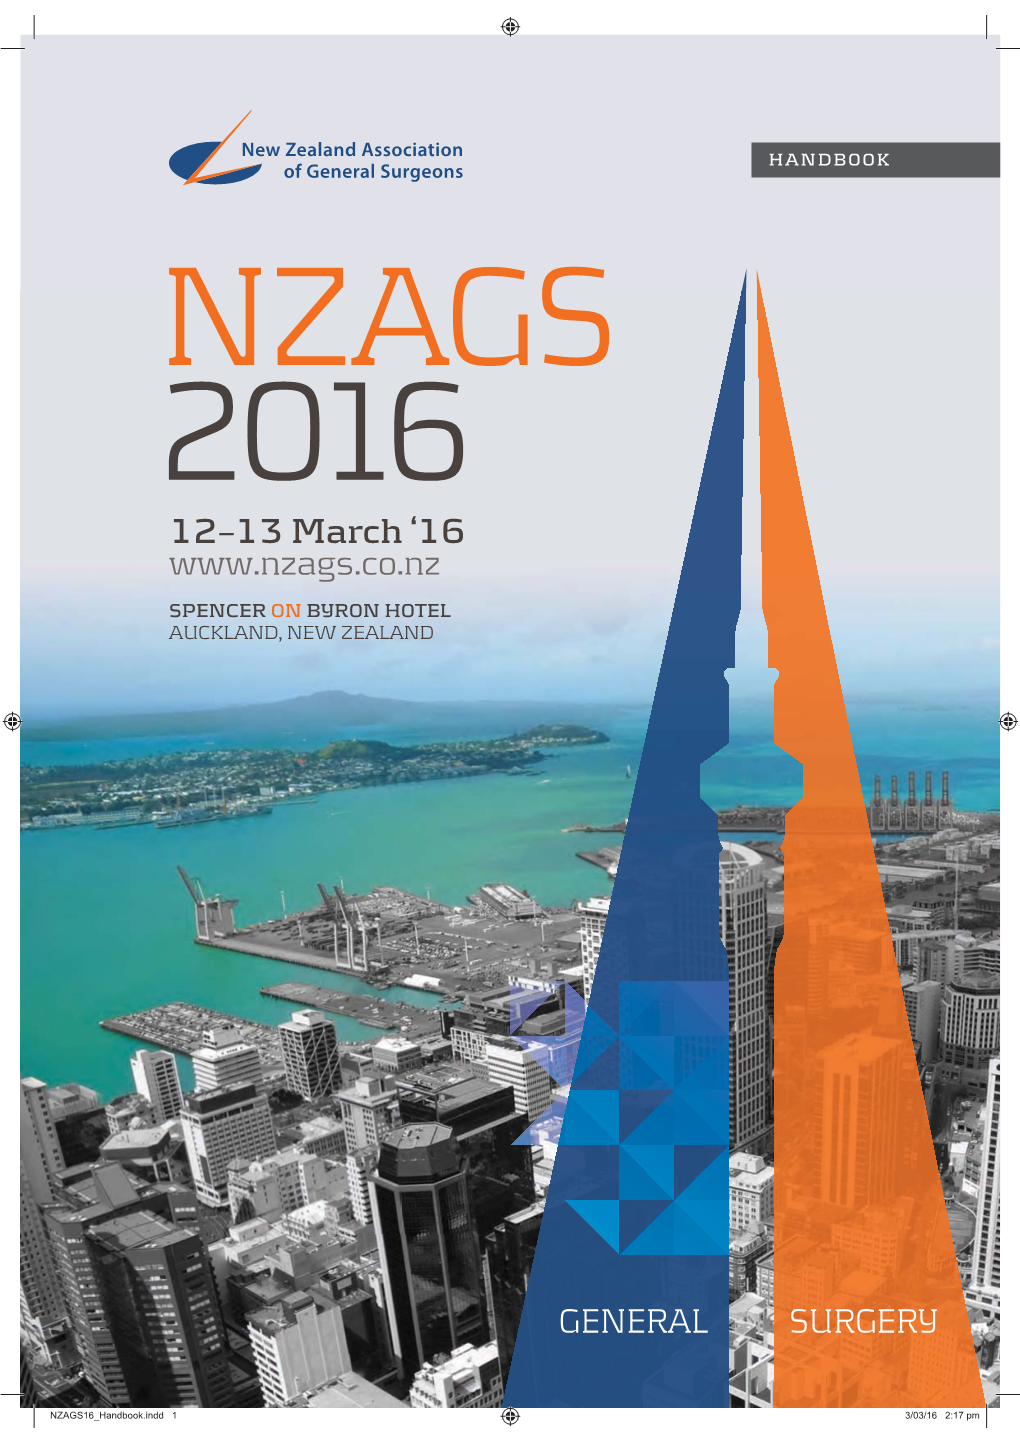 NZAGS ASM Auckland 2016